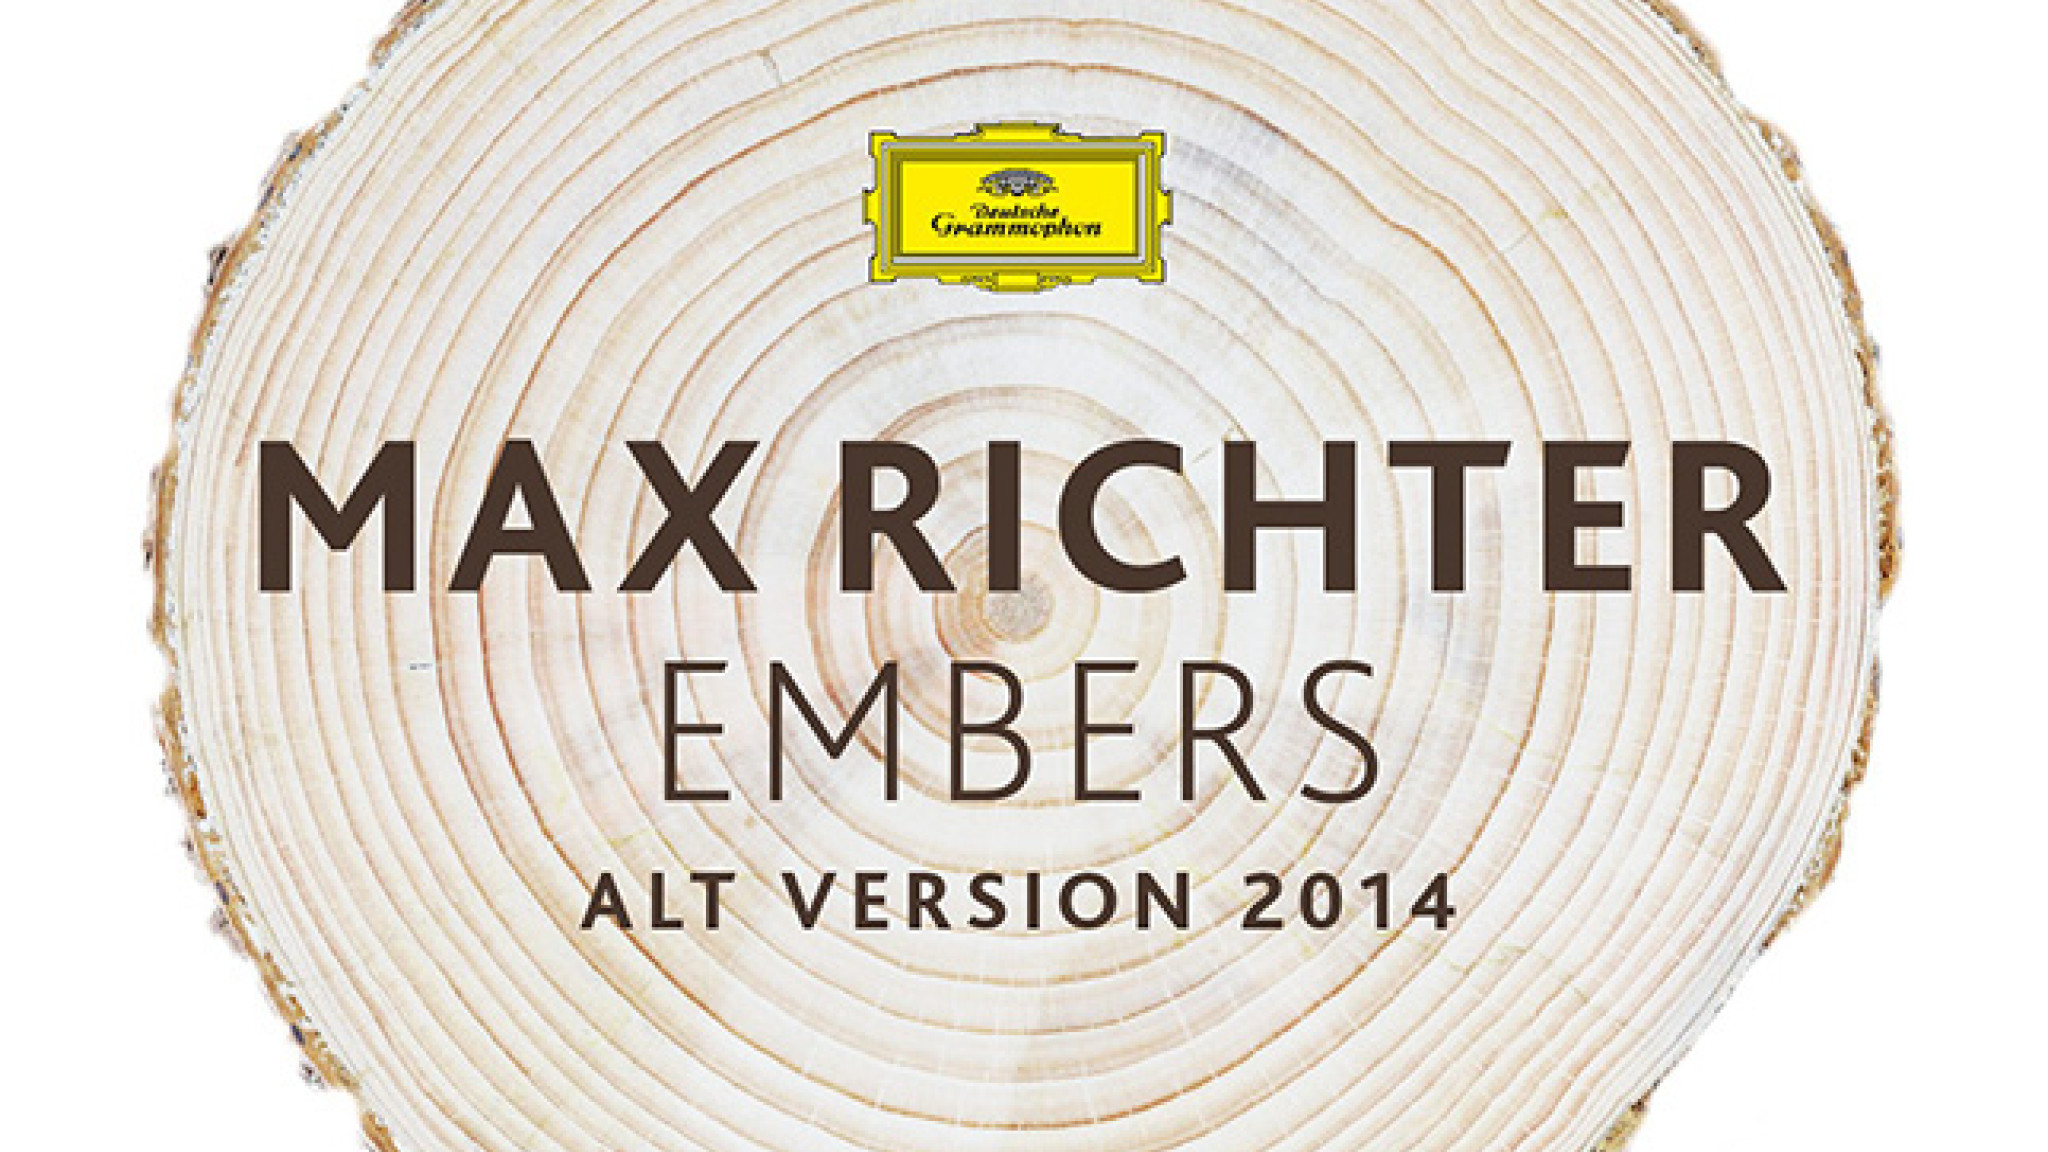 Max Richter Embers 2014